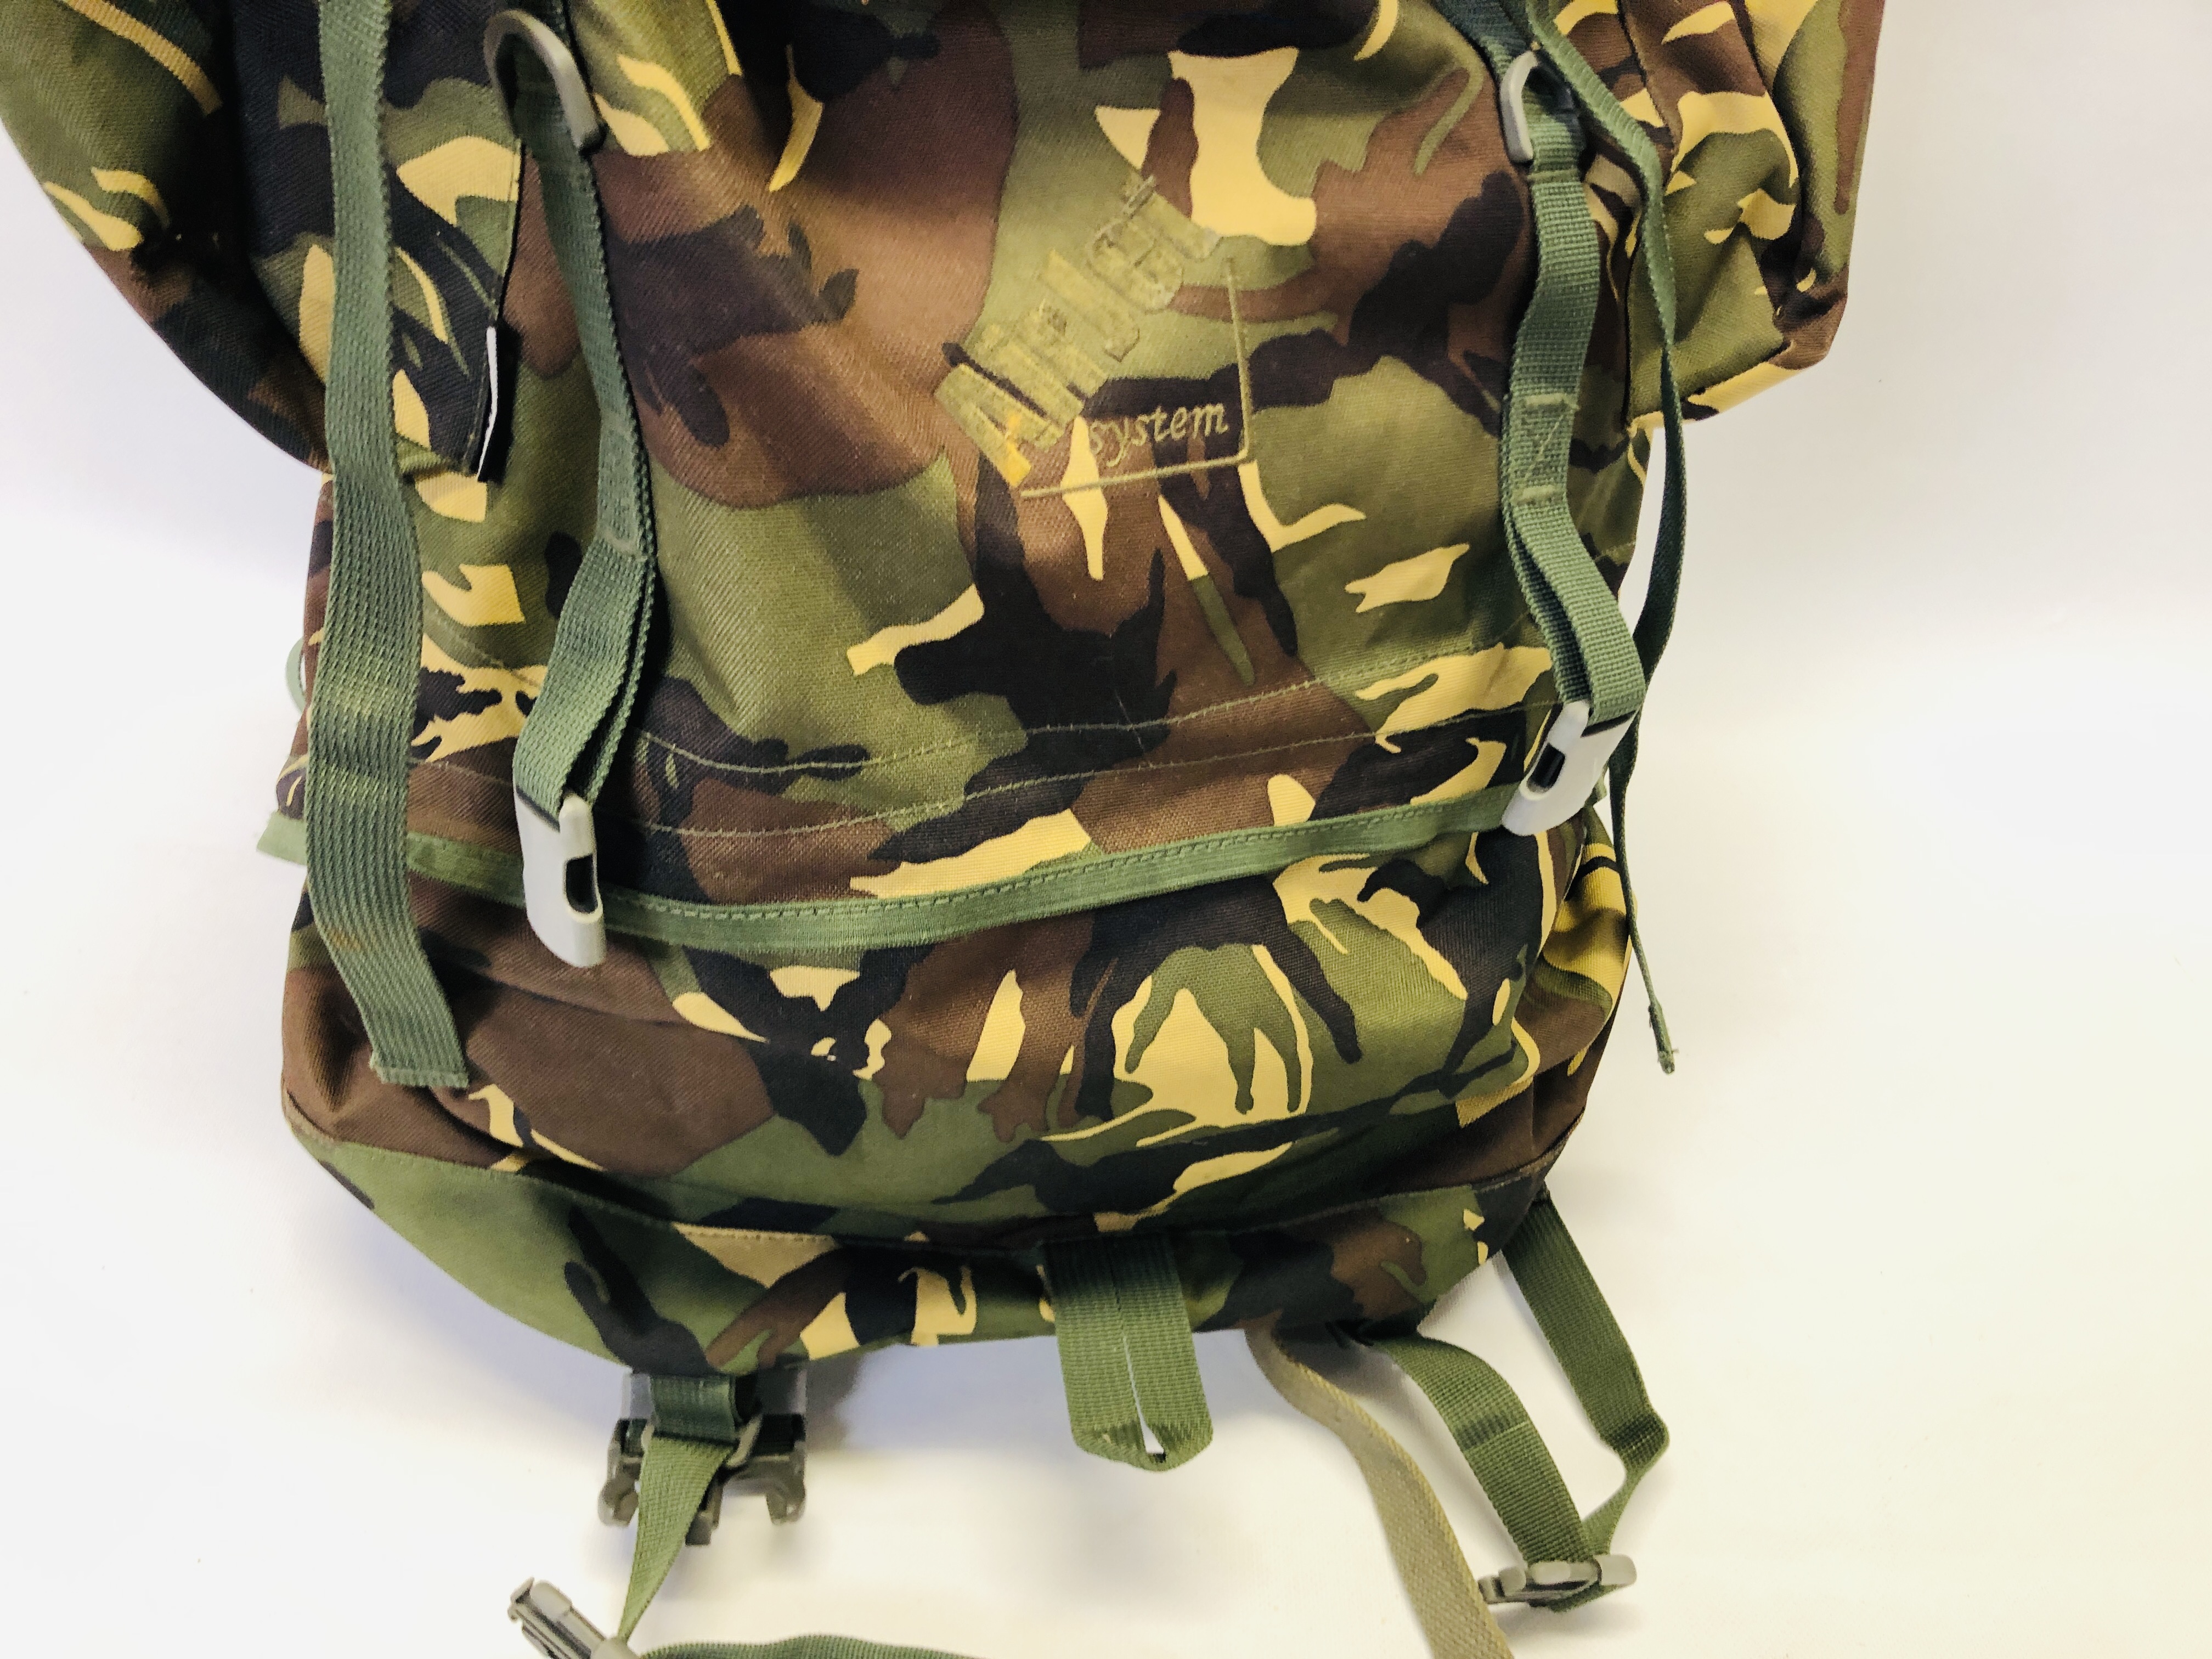 AIR JET SYSTEM TRACPAC 85 CAMO RUCKSACK & CONTENTS. - Image 4 of 10